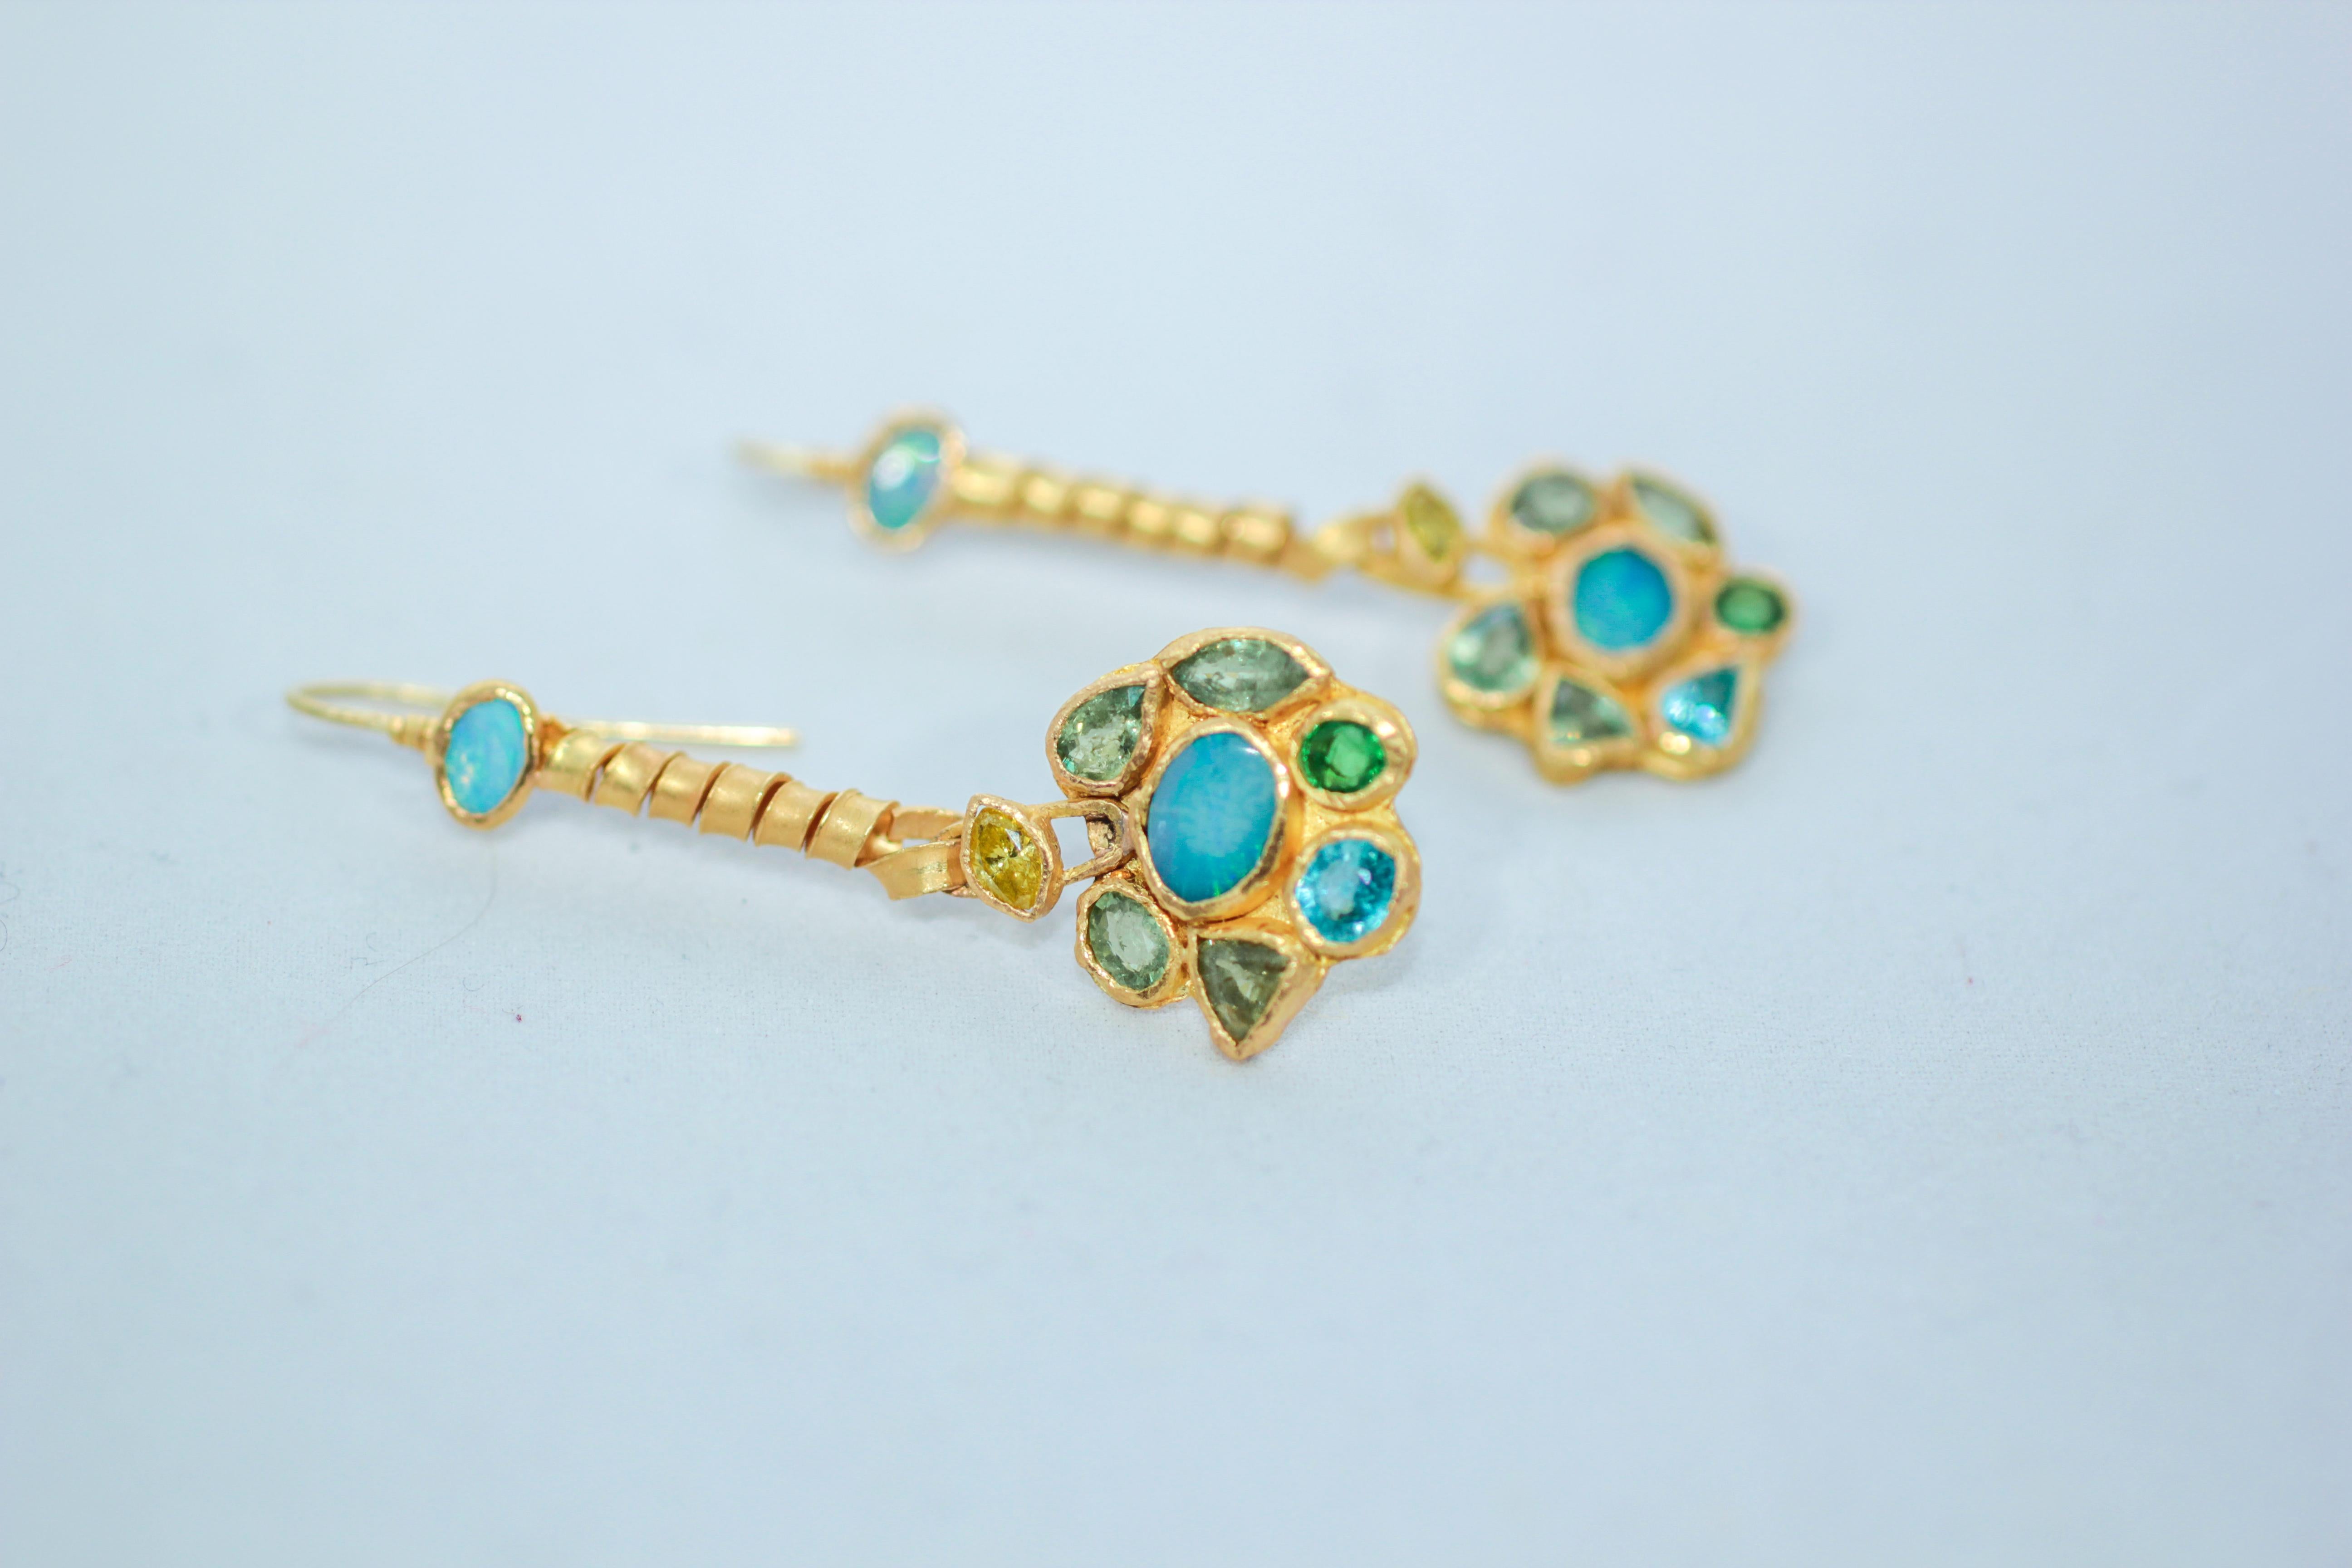 Forget-Me-Not flowers dangle drop earrings. Opals, yellow diamonds, demantoid garnets, zircons are bezel set in 21K gold. One-of-a-kind, handmade. Beautiful sparkle and intense blue-green-yellow colors. Feminine and elegant, these will surely start